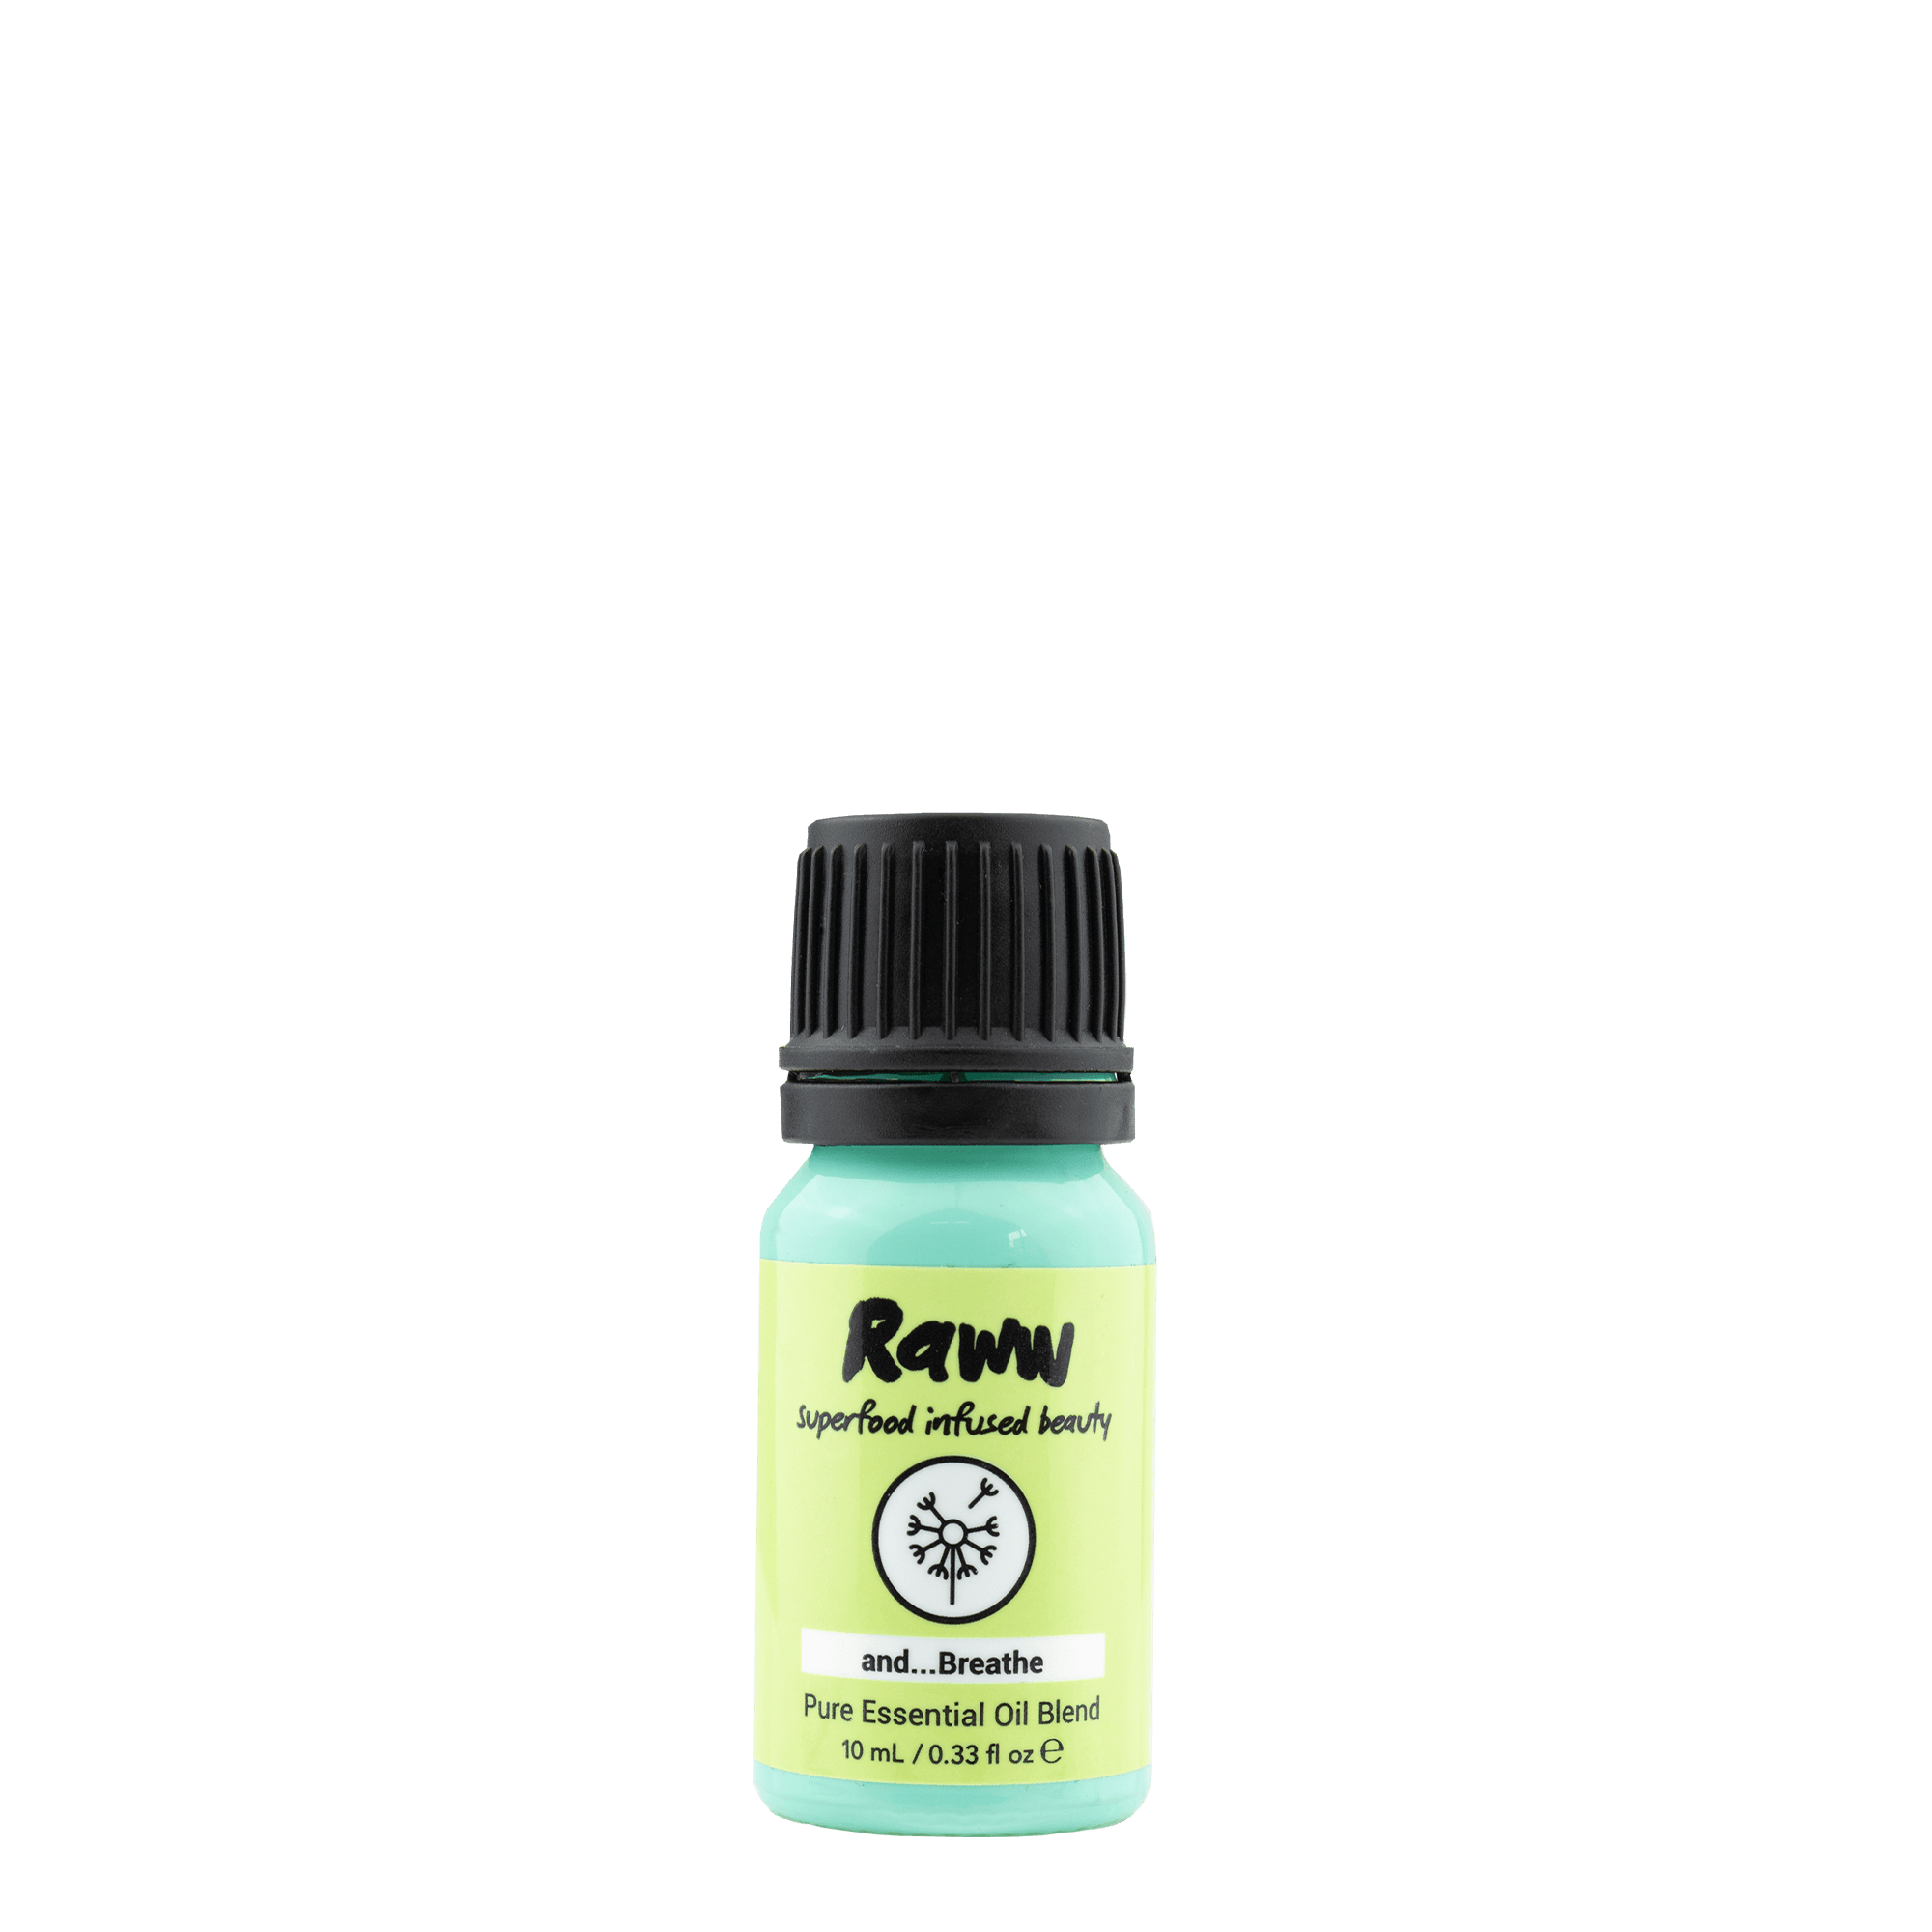 And, Breathe Essential Oil Blend | RAWW Cosmetics | 01